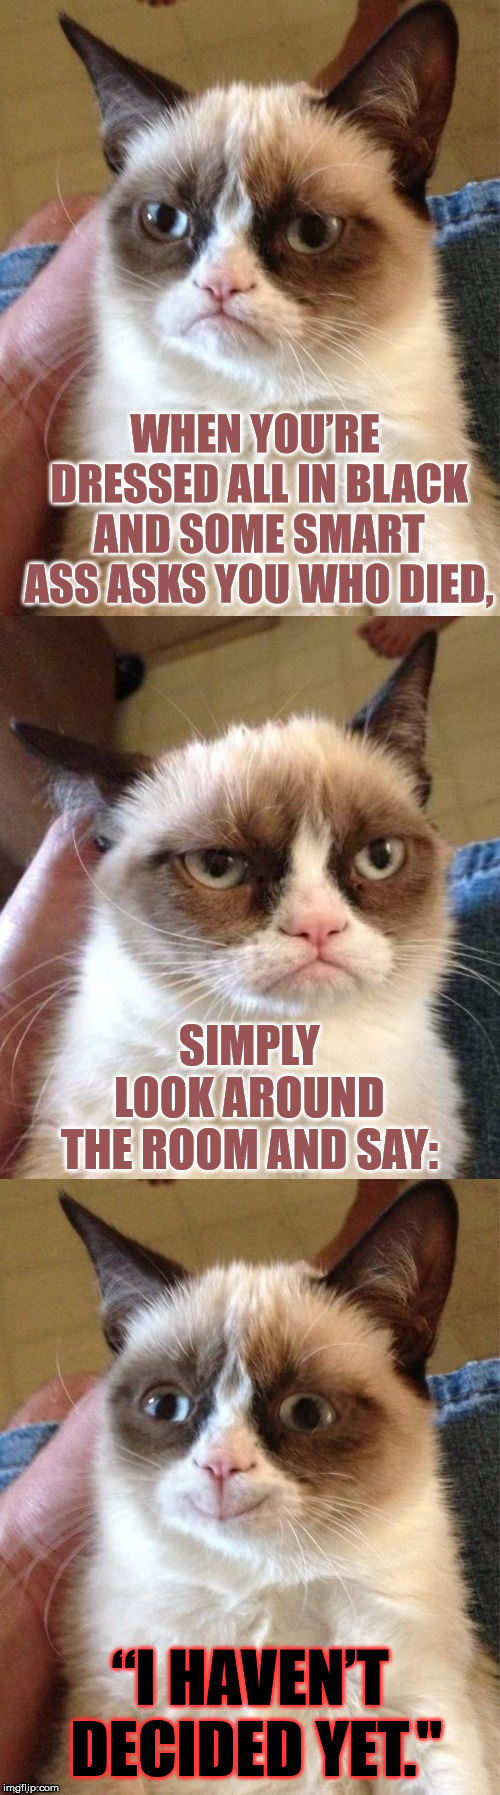 Think twice before criticizing it's color choice... | WHEN YOU’RE DRESSED ALL IN BLACK AND SOME SMART ASS ASKS YOU WHO DIED, SIMPLY LOOK AROUND THE ROOM AND SAY:; “I HAVEN’T DECIDED YET." | image tagged in bad pun grumpy cat,funny,cats,grumpy cat,jokes,black | made w/ Imgflip meme maker